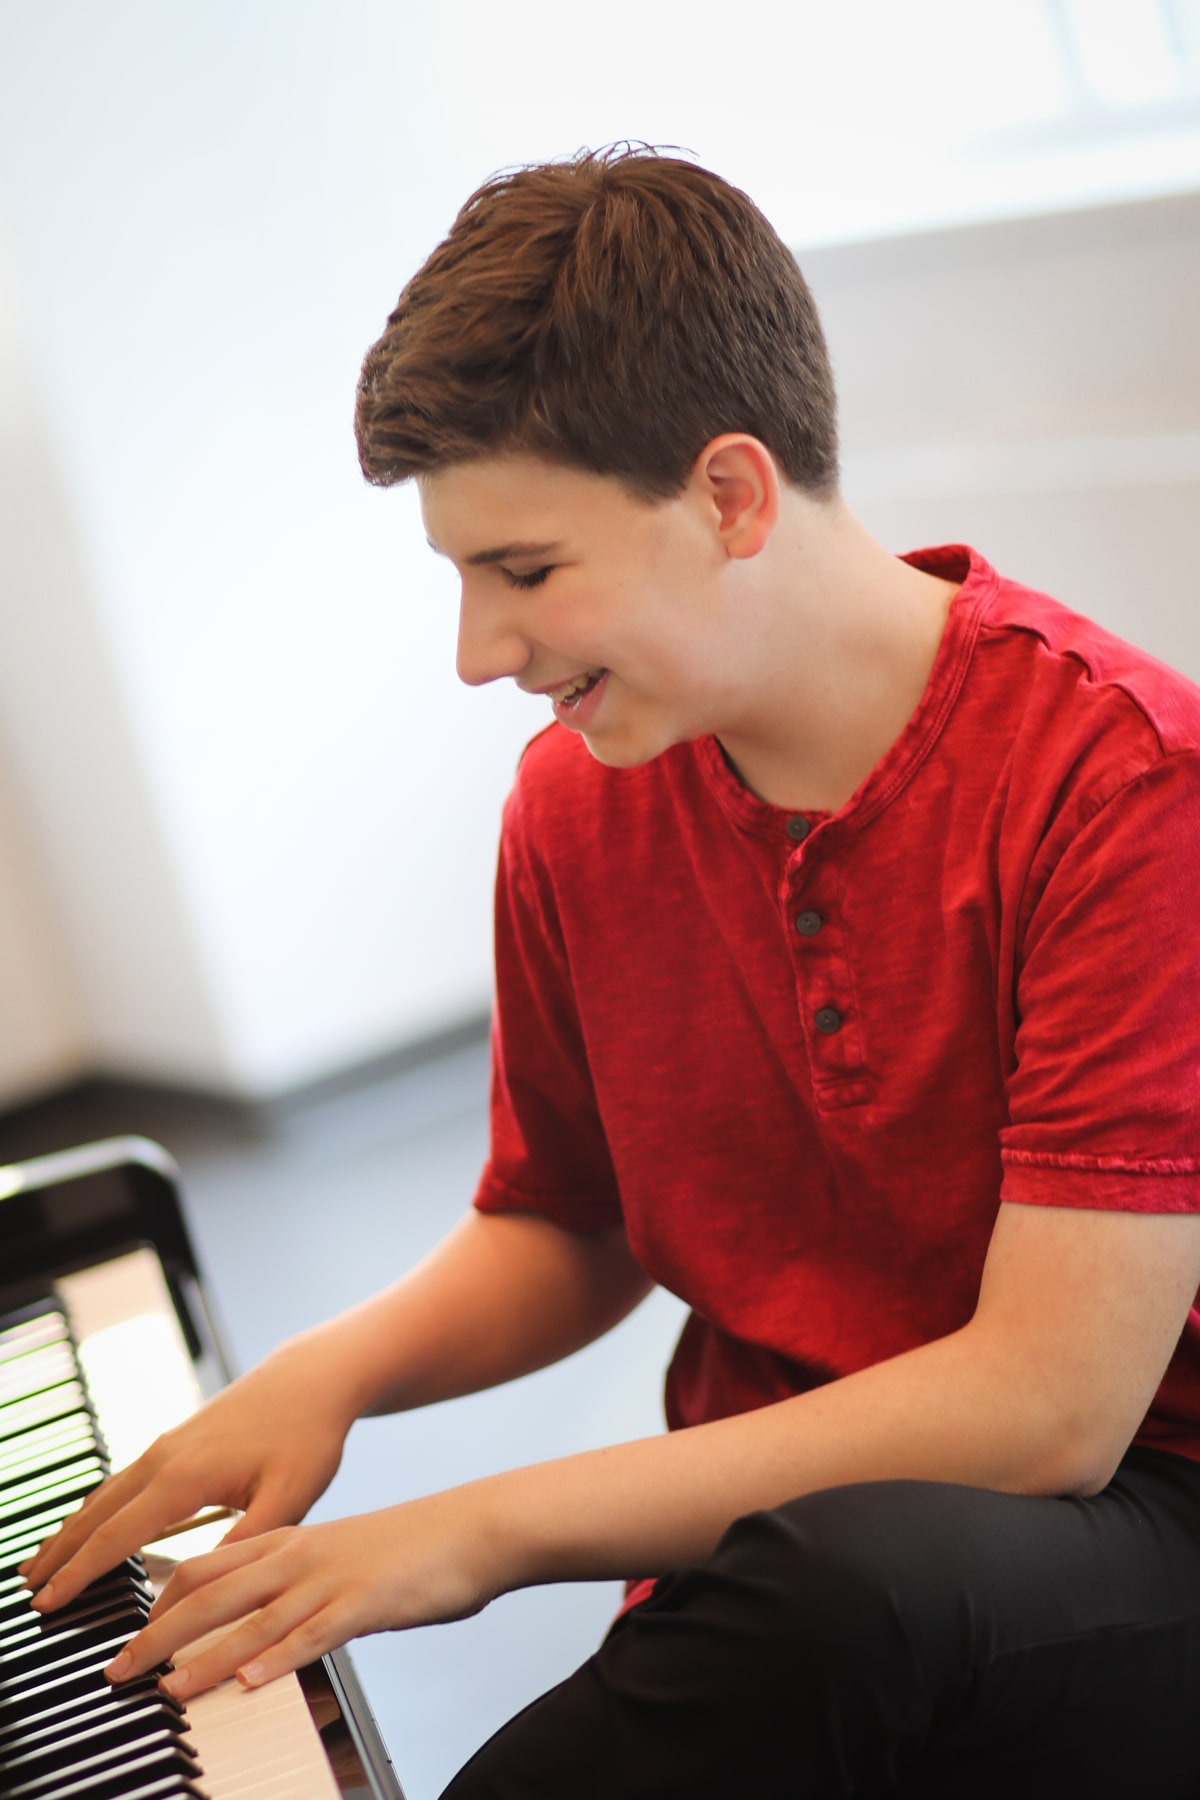 At a young age, Joshua Turchin fell in love with music and performance. Discover all the work that he's been doing and the bright future he has.